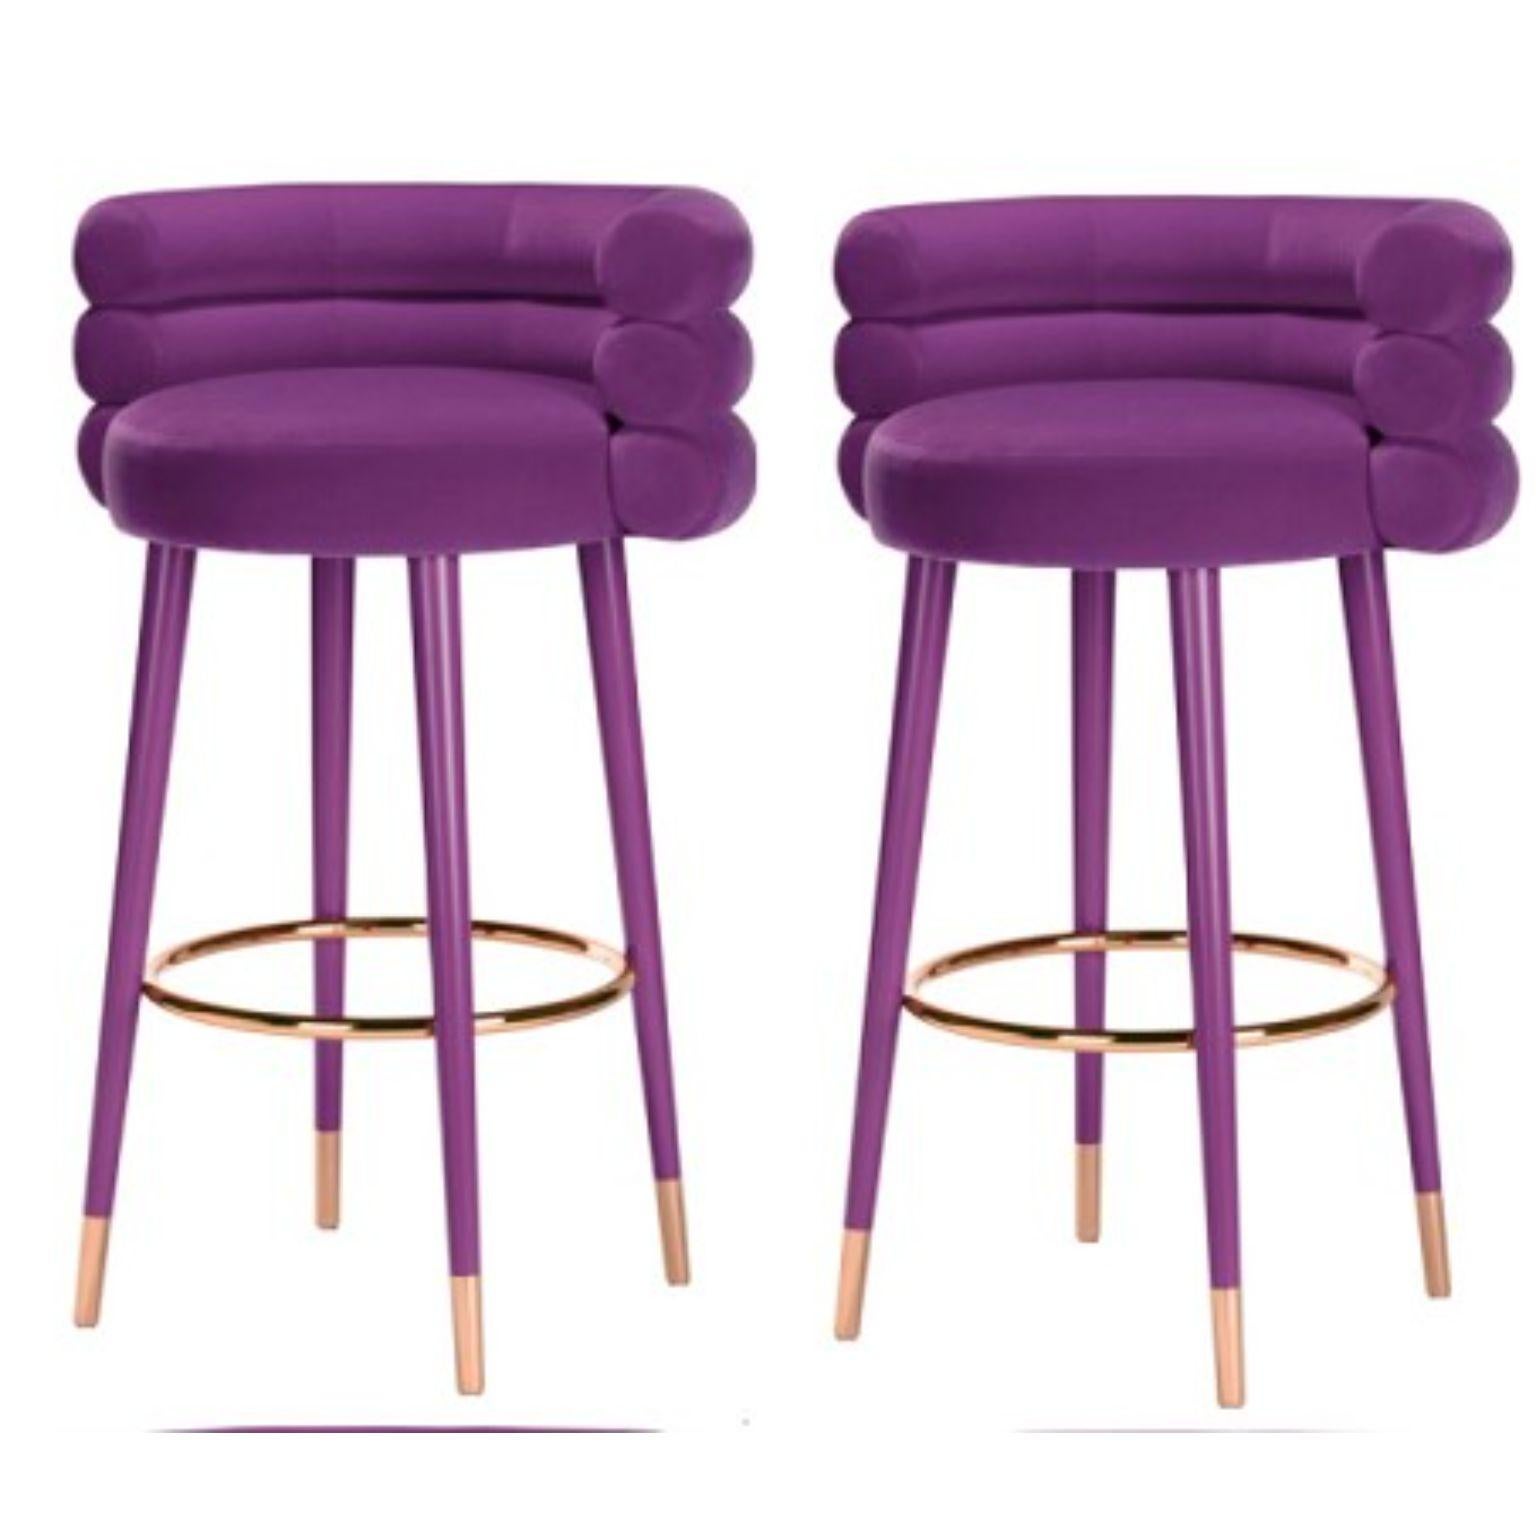 Set of 2 marshmallow bar stools, Royal Stranger
Dimensions: 100 x 70 x 60 cm.
Materials: Velvet upholstery, brass.
Available in: Mint green, light pink, royal green and royal red.

Royal stranger is an exclusive furniture brand determined to